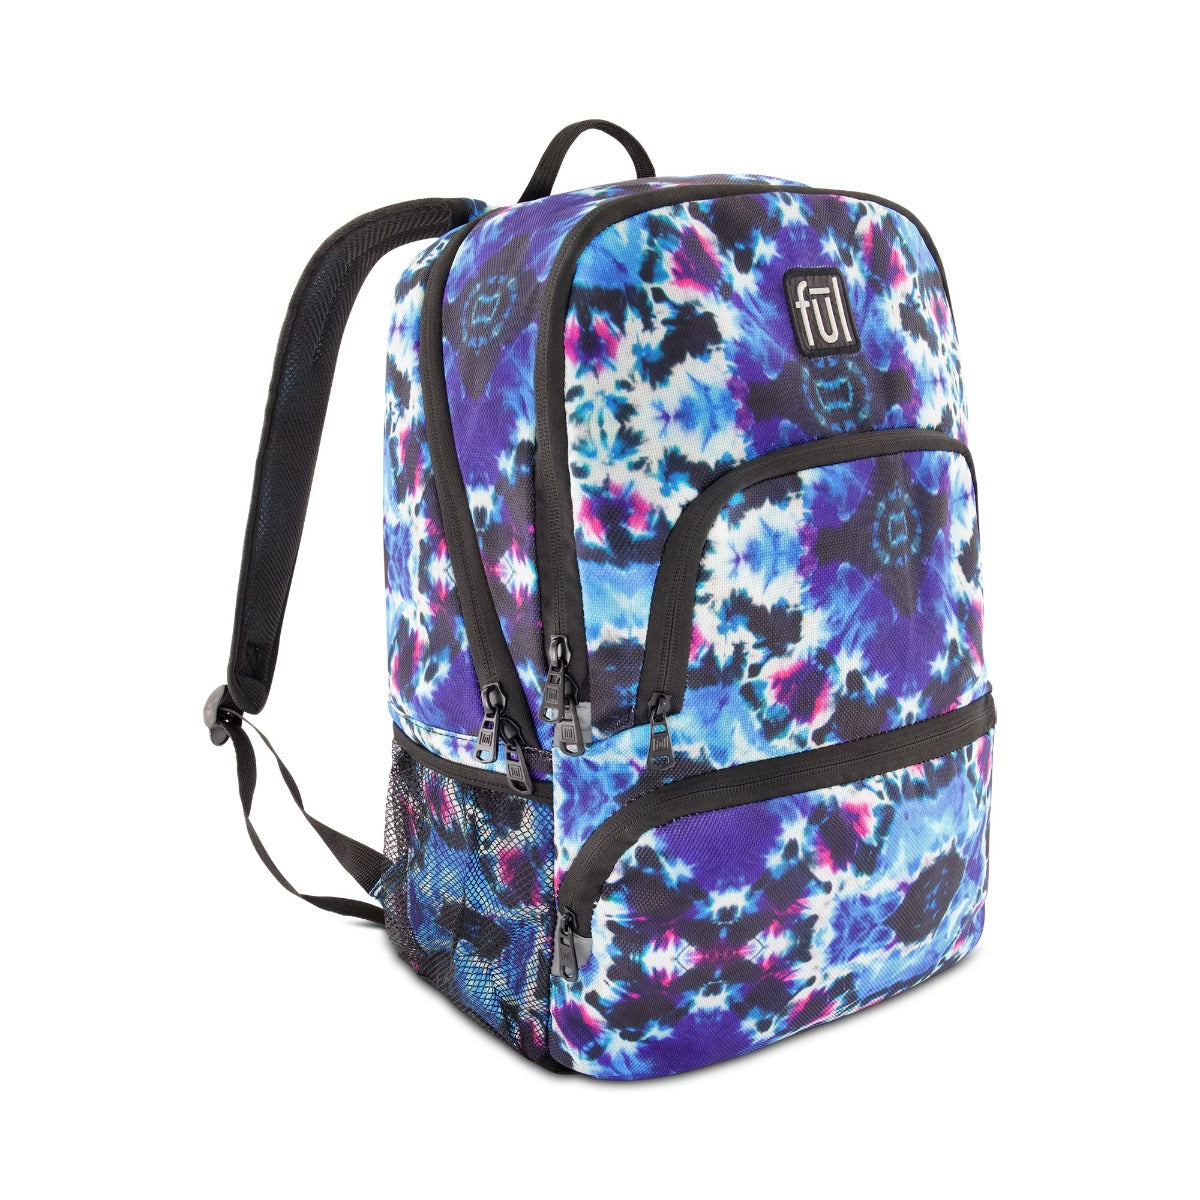 Terrace Laptop Backpack FUL Blue White Tie Dye Carry-On Backpack on Sale $29.99